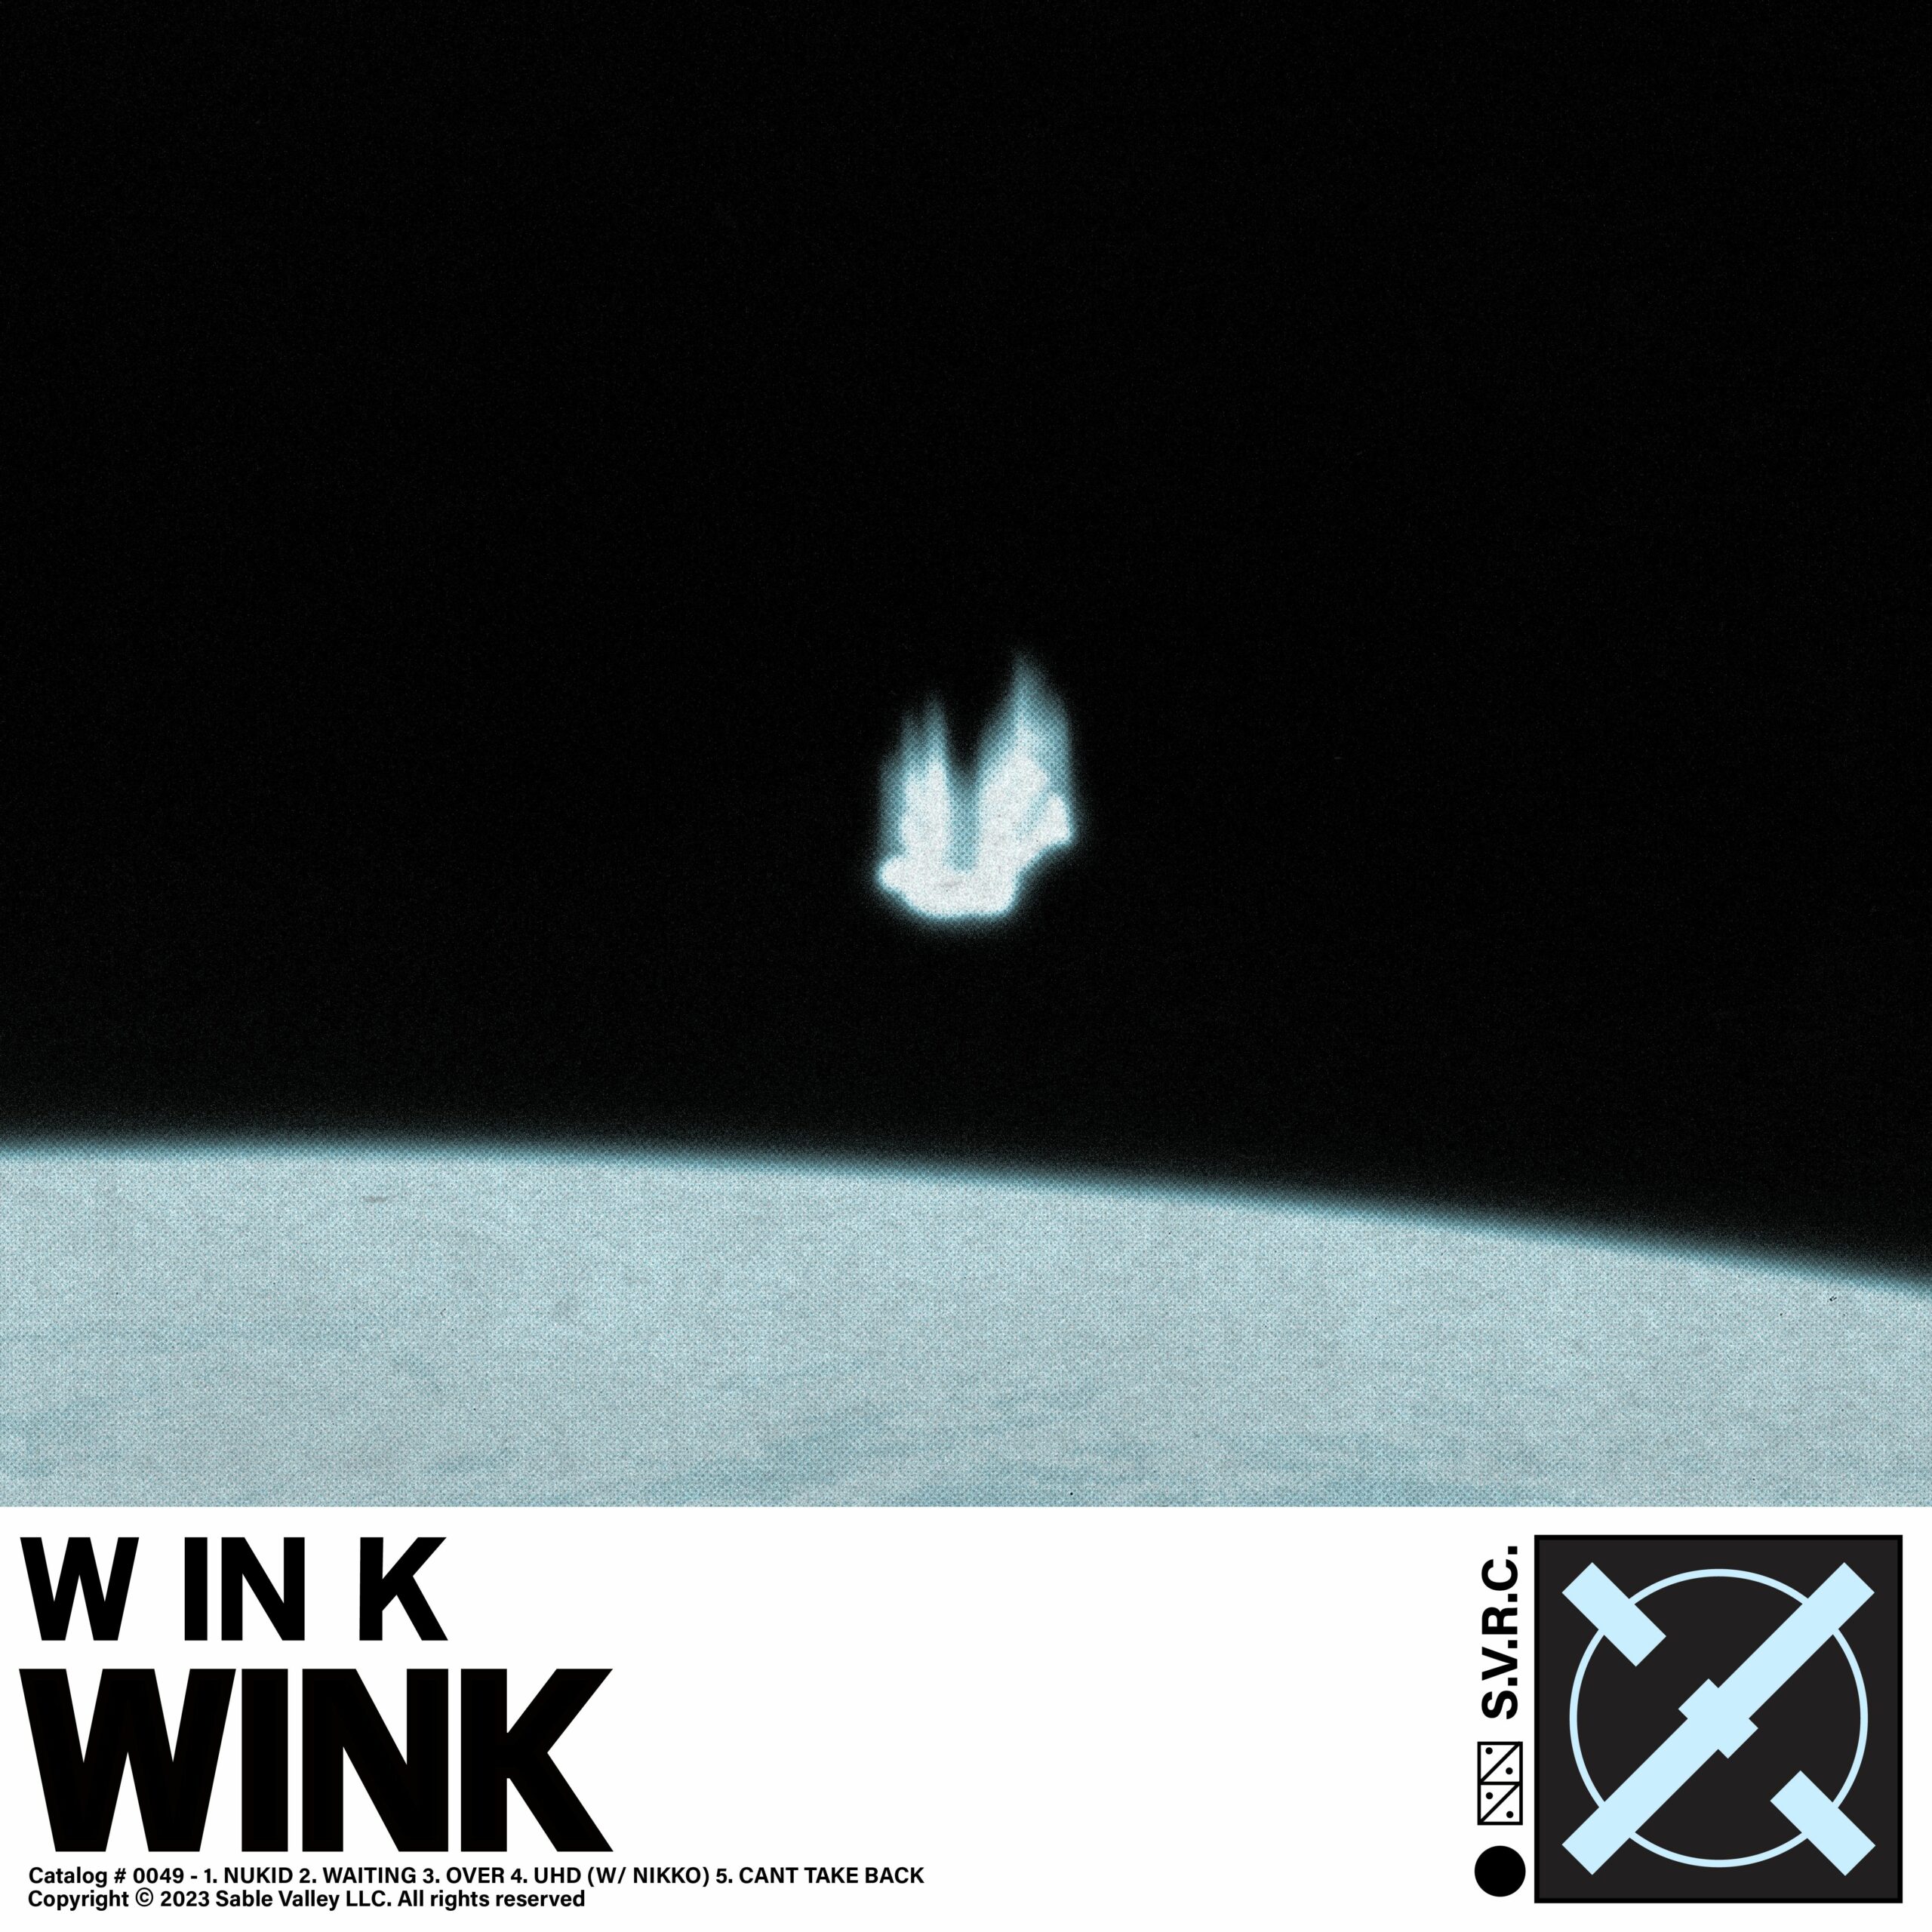 2023 Artist to Watch W IN K joins Sable Valley with debut EP, ‘WINK’